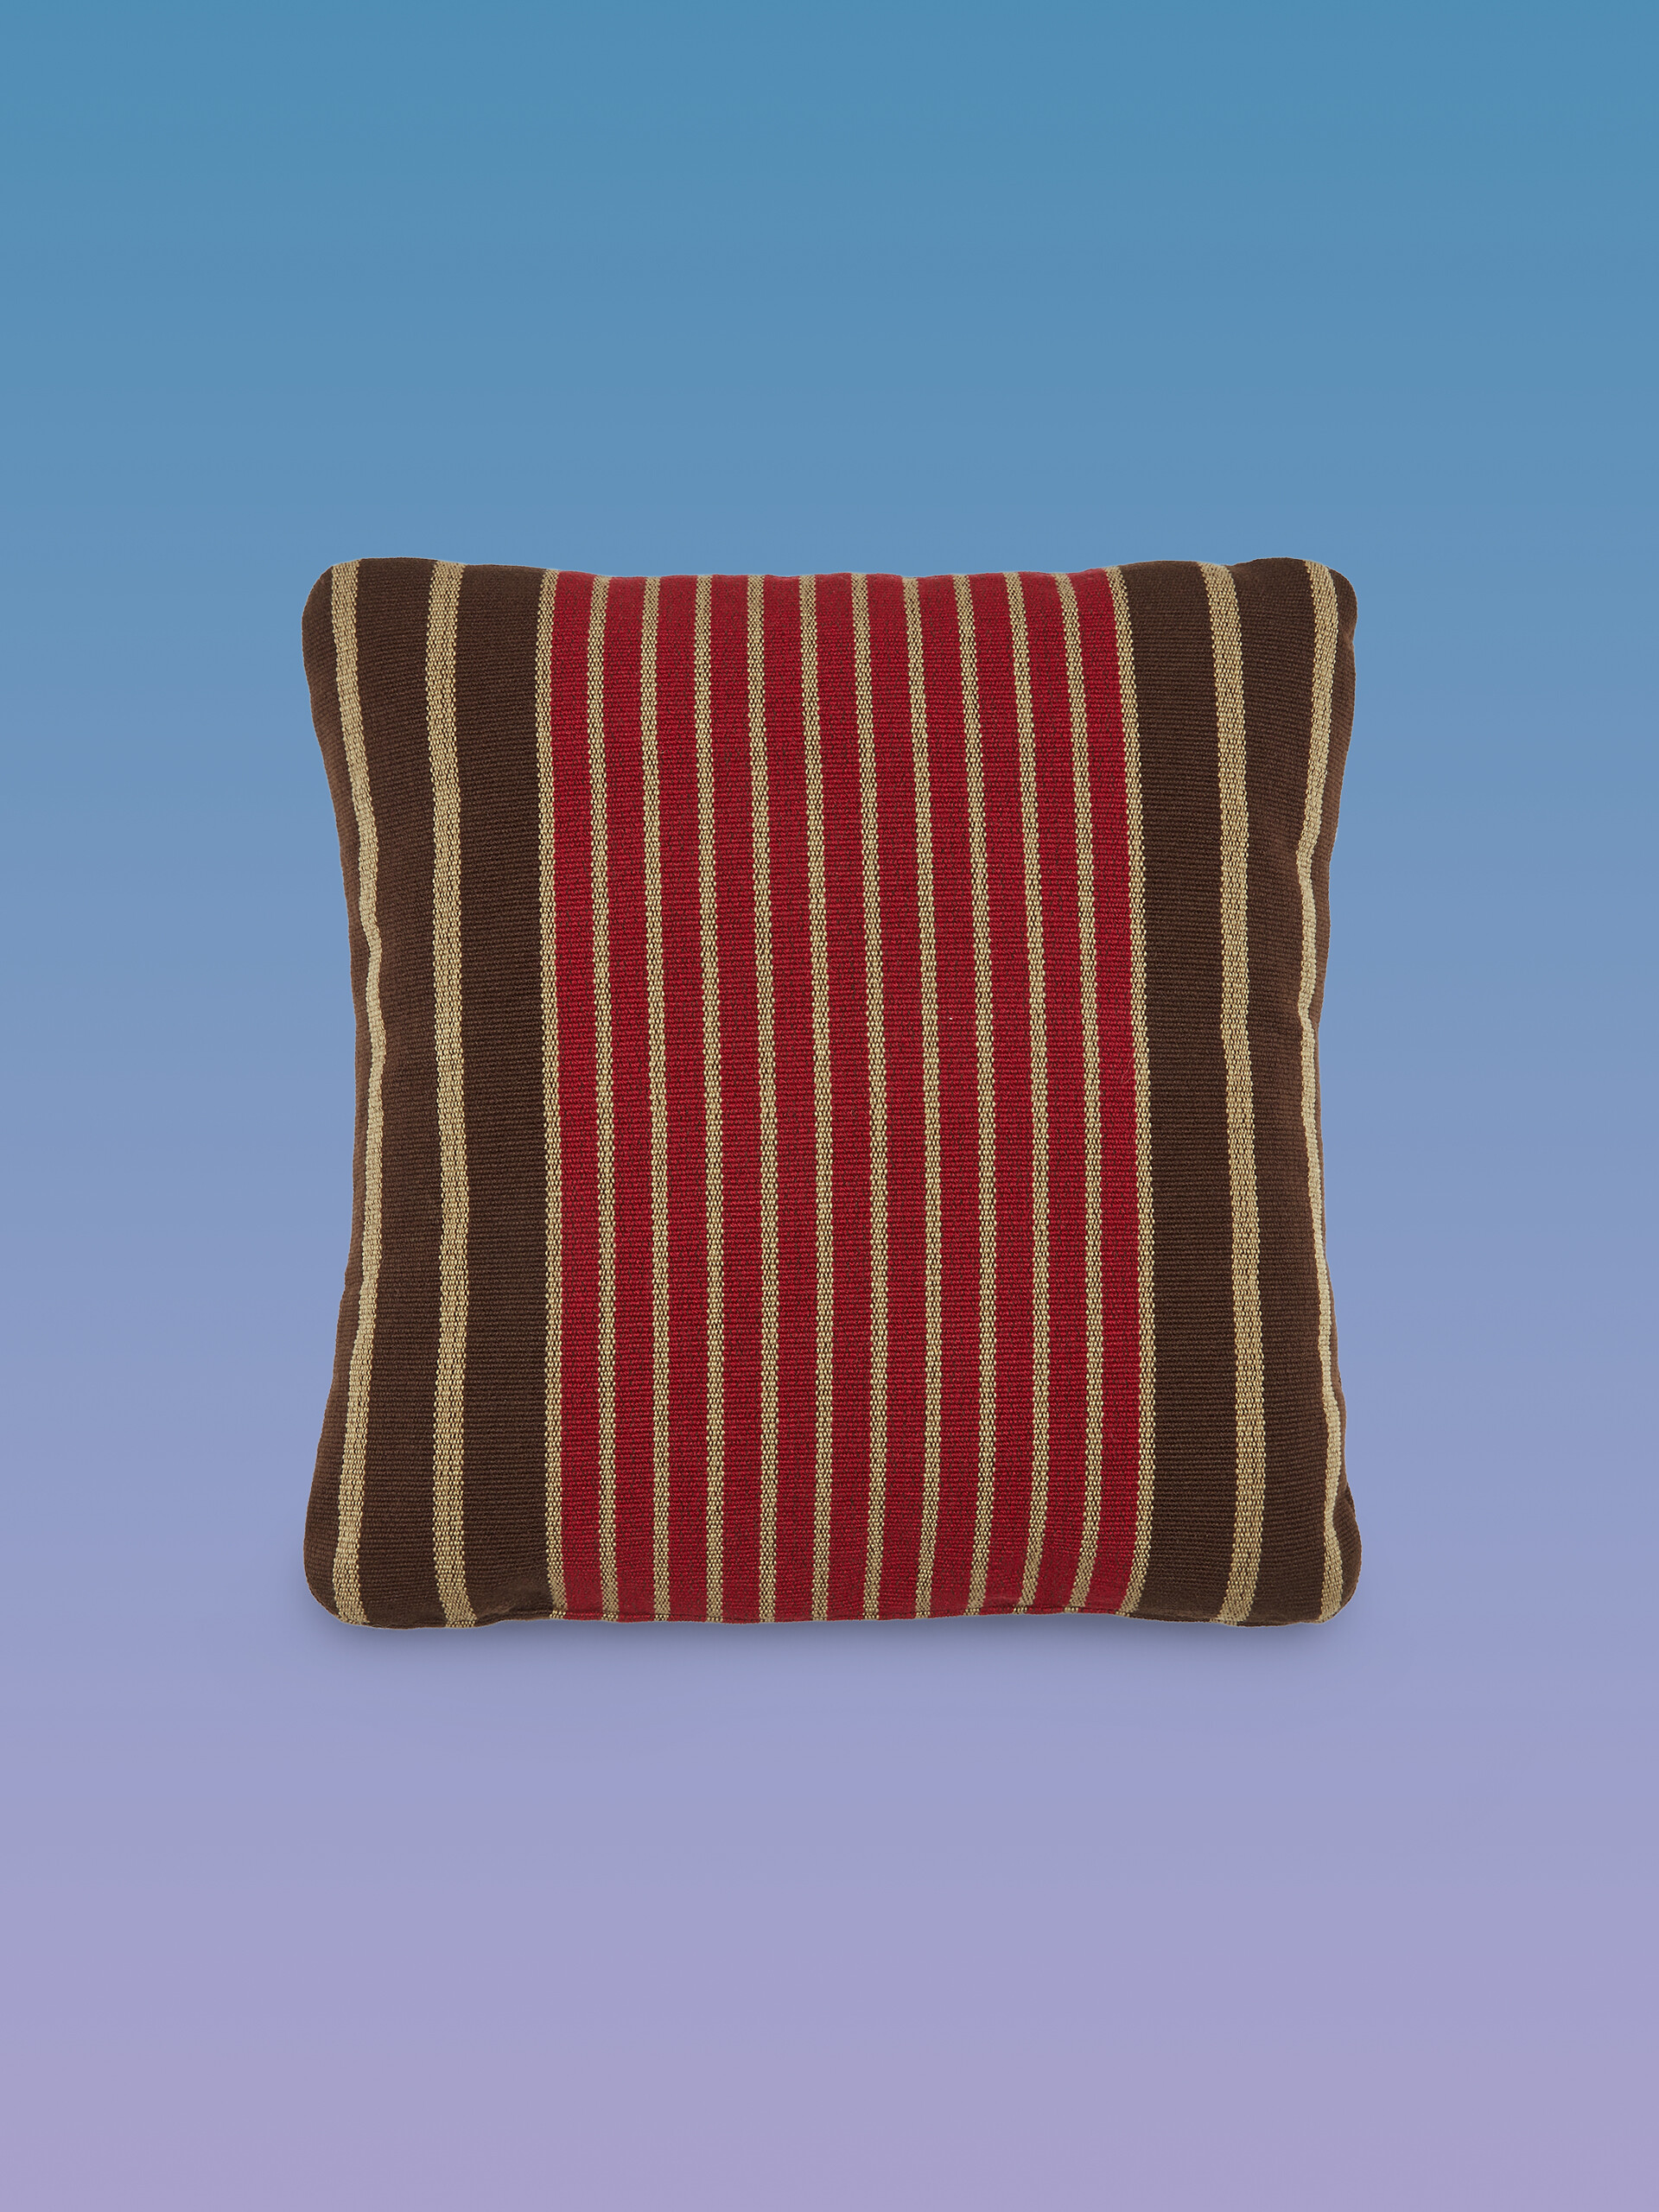 MARNI MARKET square pillow cover in polyester with red brown and beige vertical stripes - Furniture - Image 1